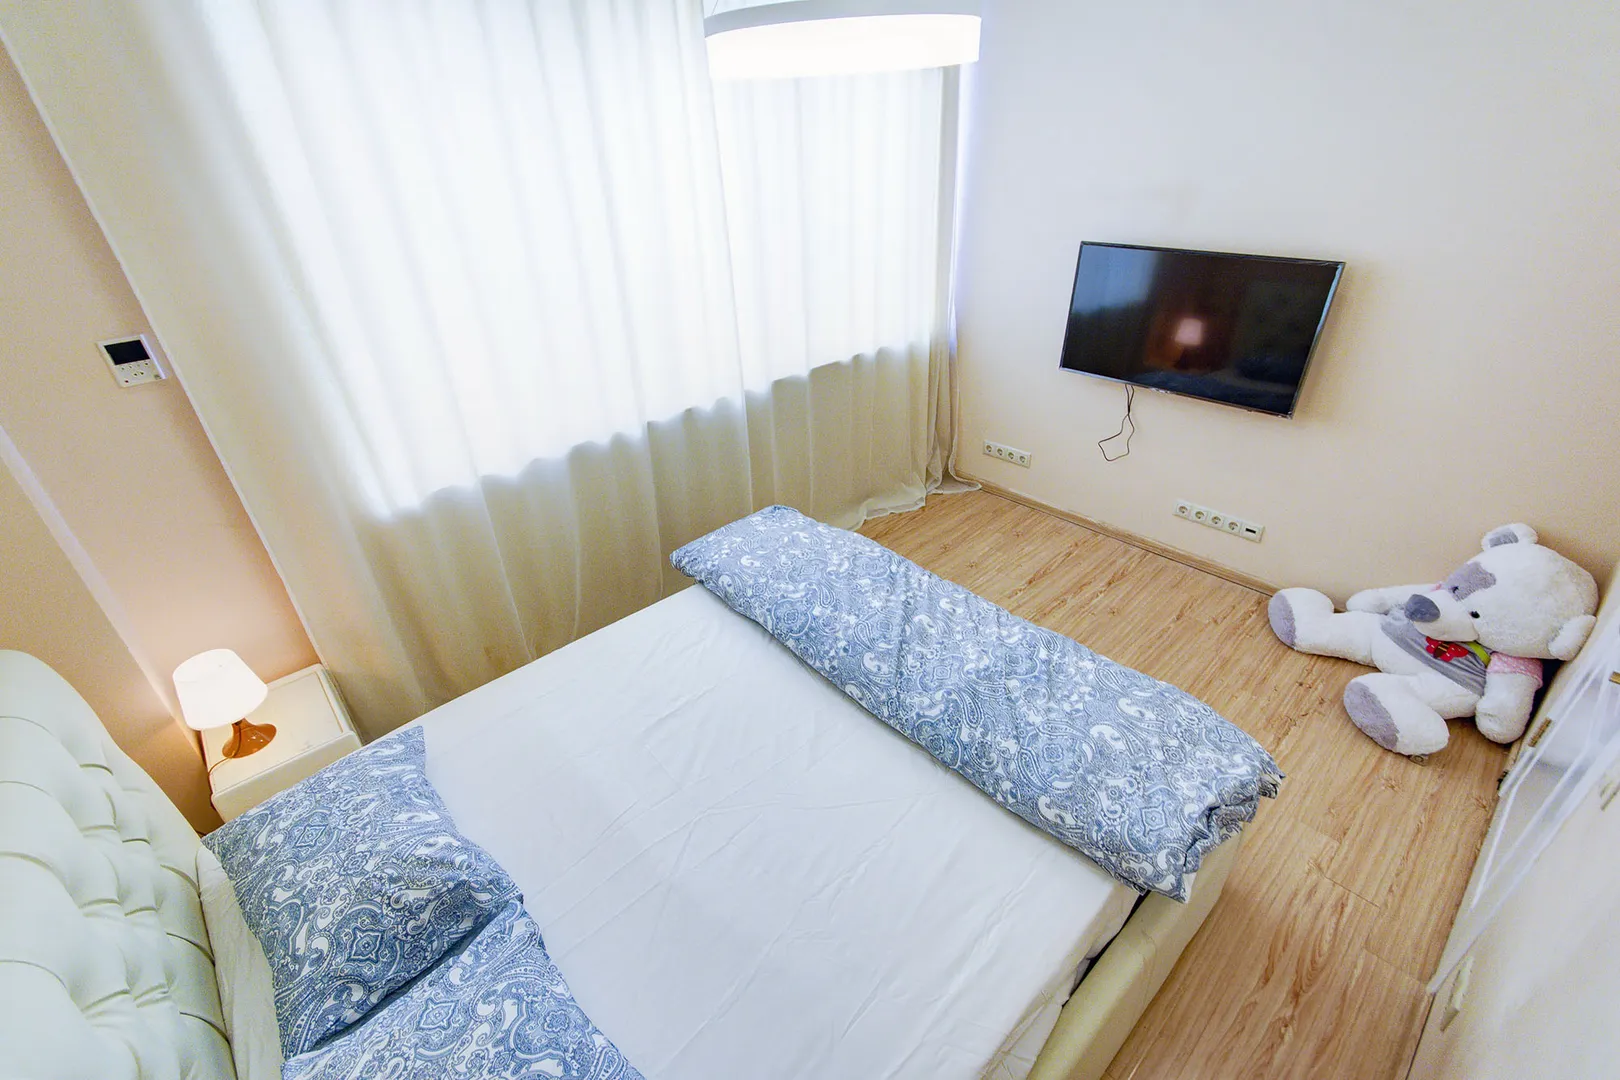 2nd bedroom with 1 queen-sized beds 1,6м  2й Спальни с 1 кровати 1,6м